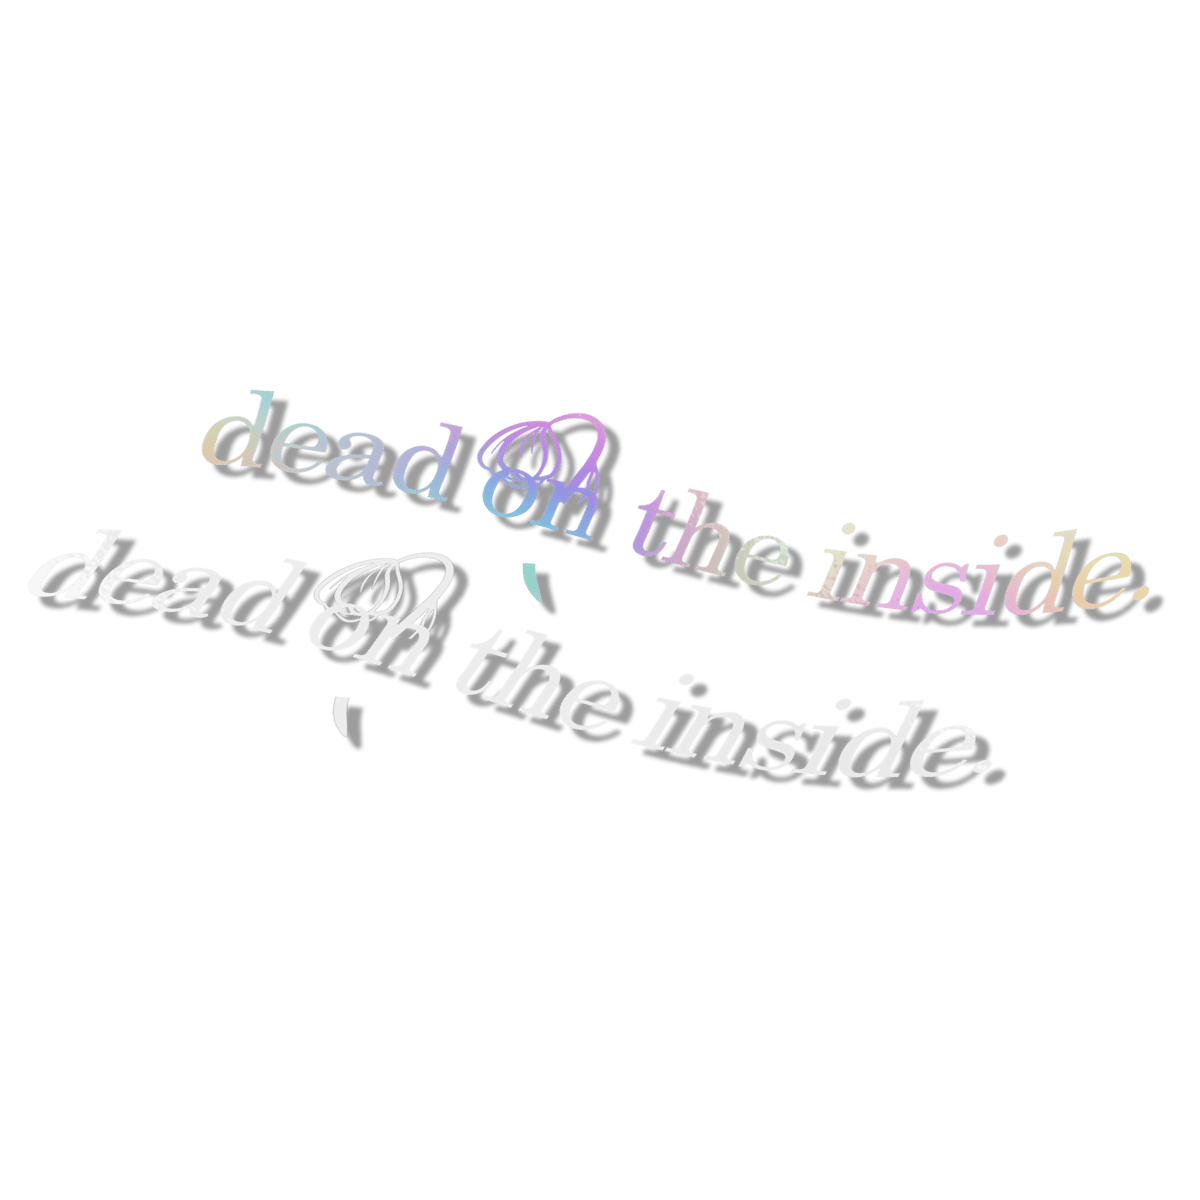 Image of Dead Inside Decal